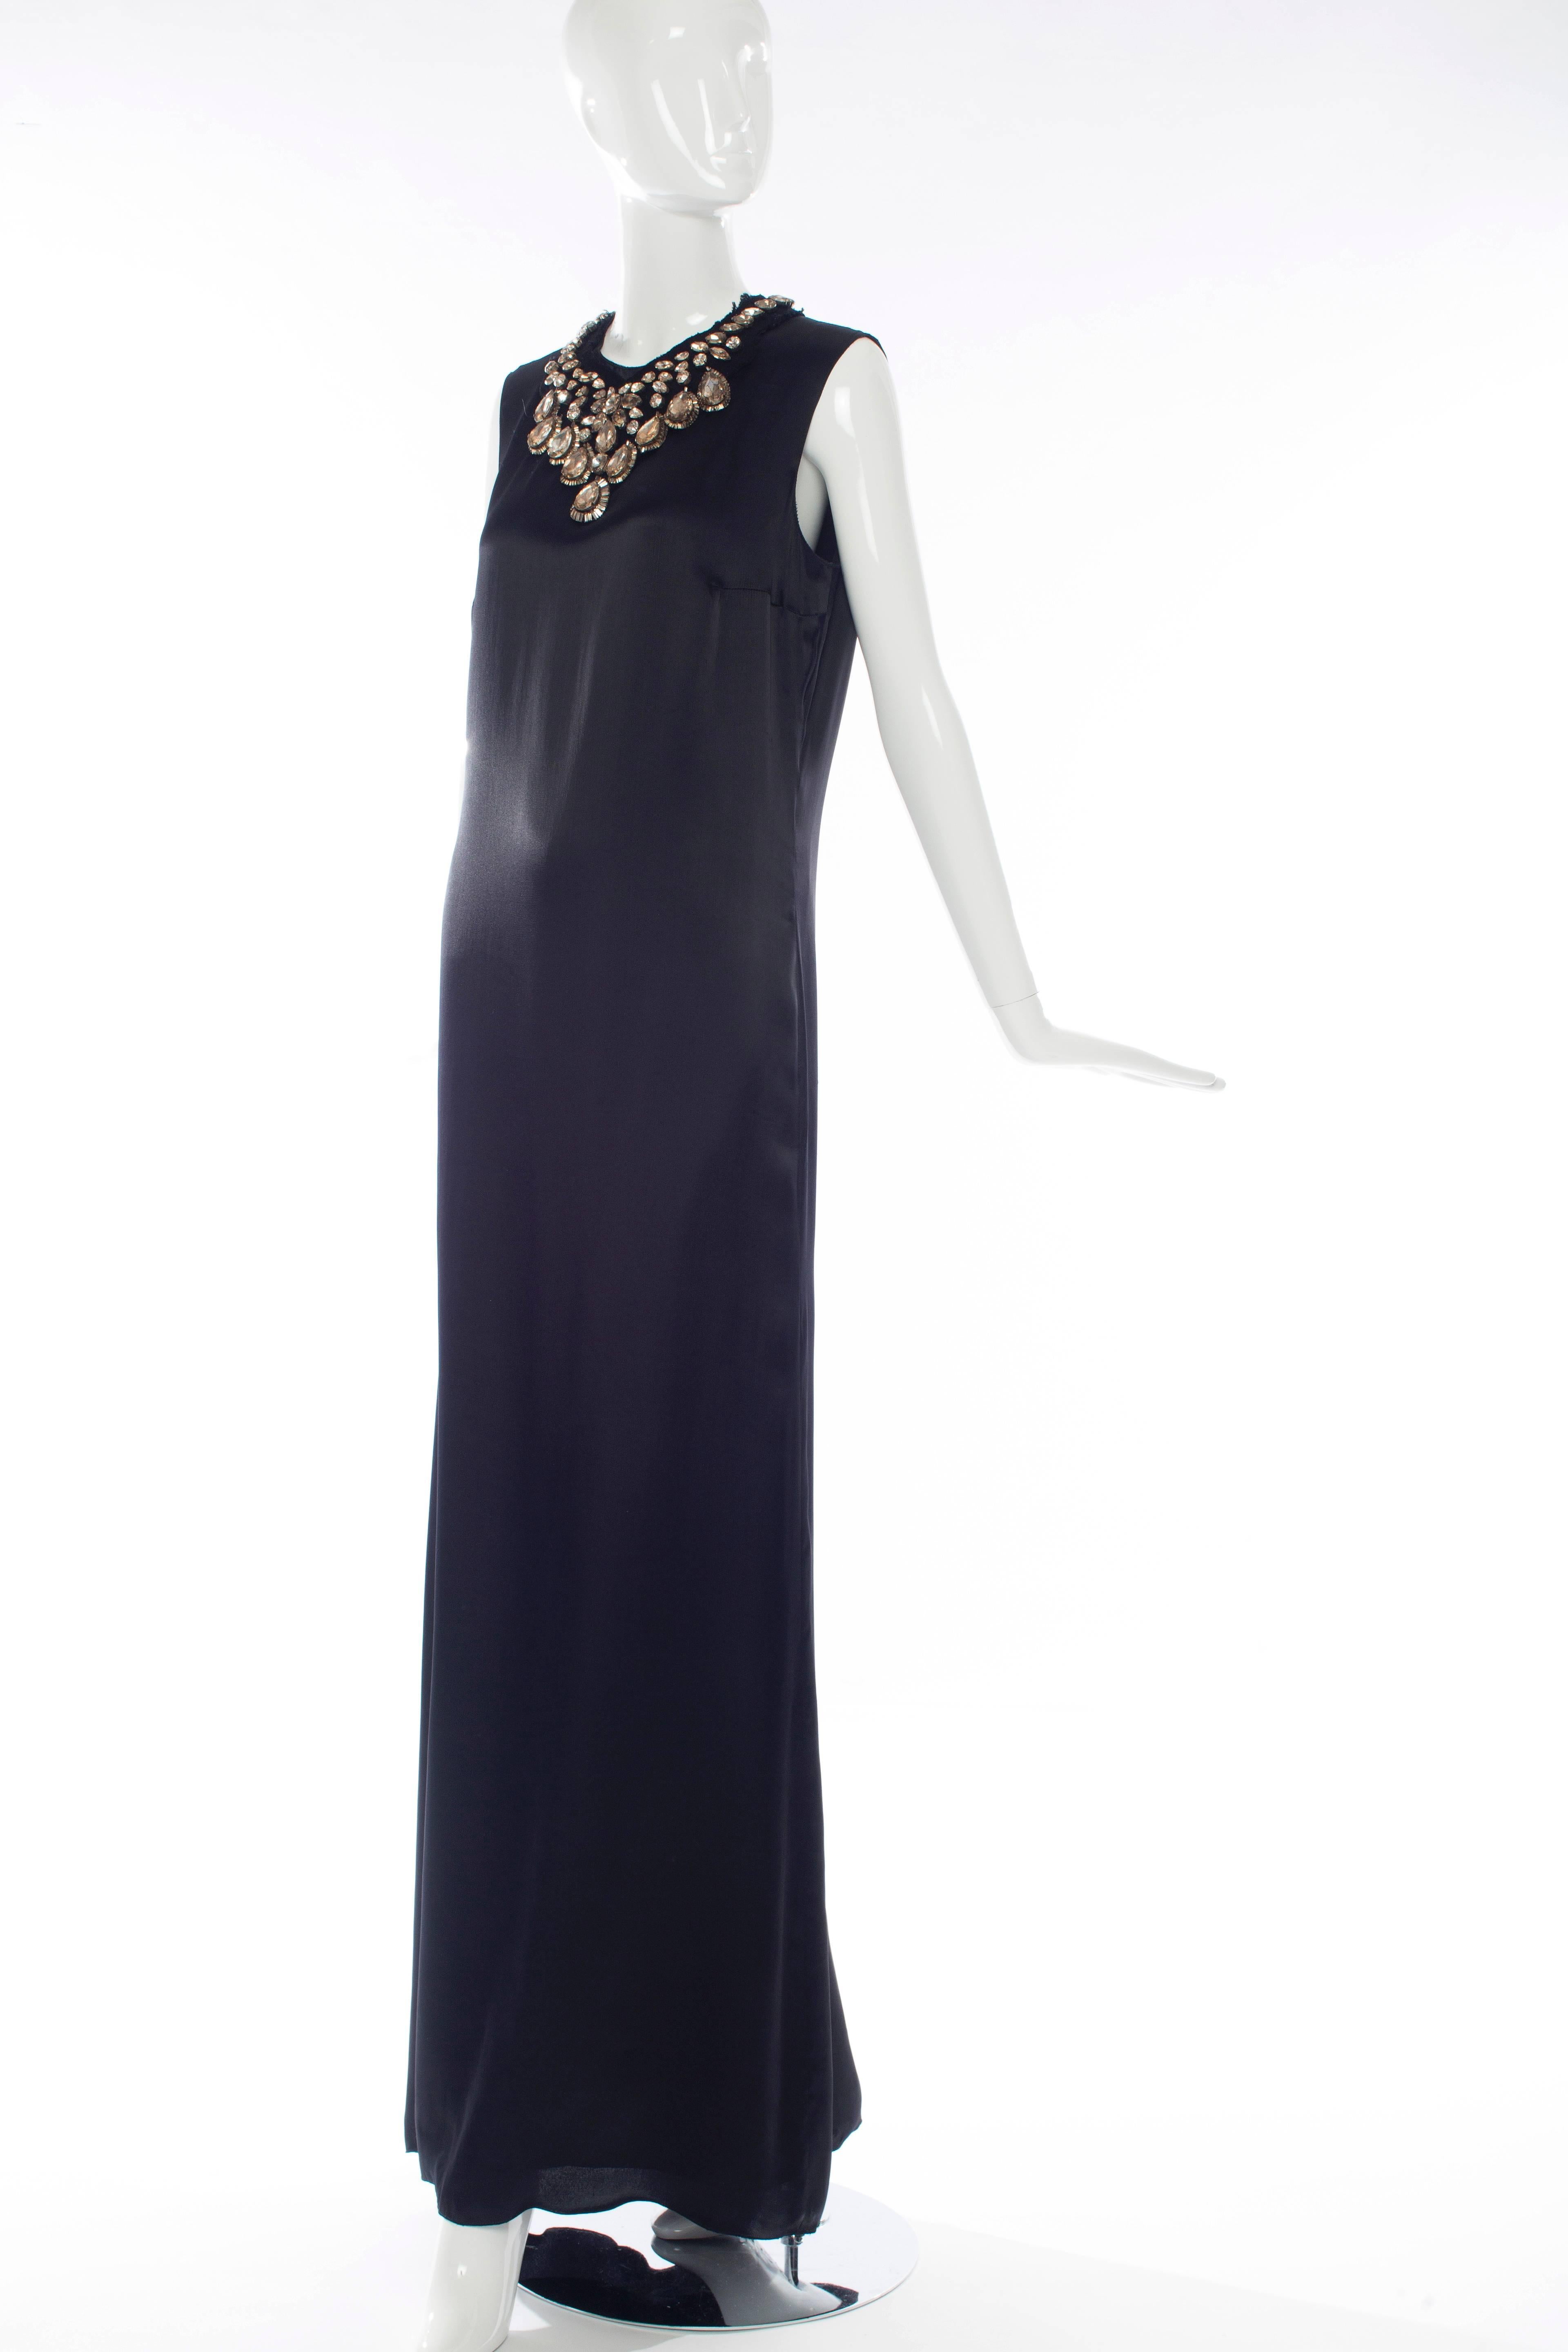 Alber Elbaz for Lanvin, Fall 2007 sleeveless black viscose silk long evening dress with prong-set crystal neckline, concealed back zip and hook and eye closure, fully lined in silk.

FR. 42
US.10

Bust, 38, Waist 36, Hips 42, Length 61